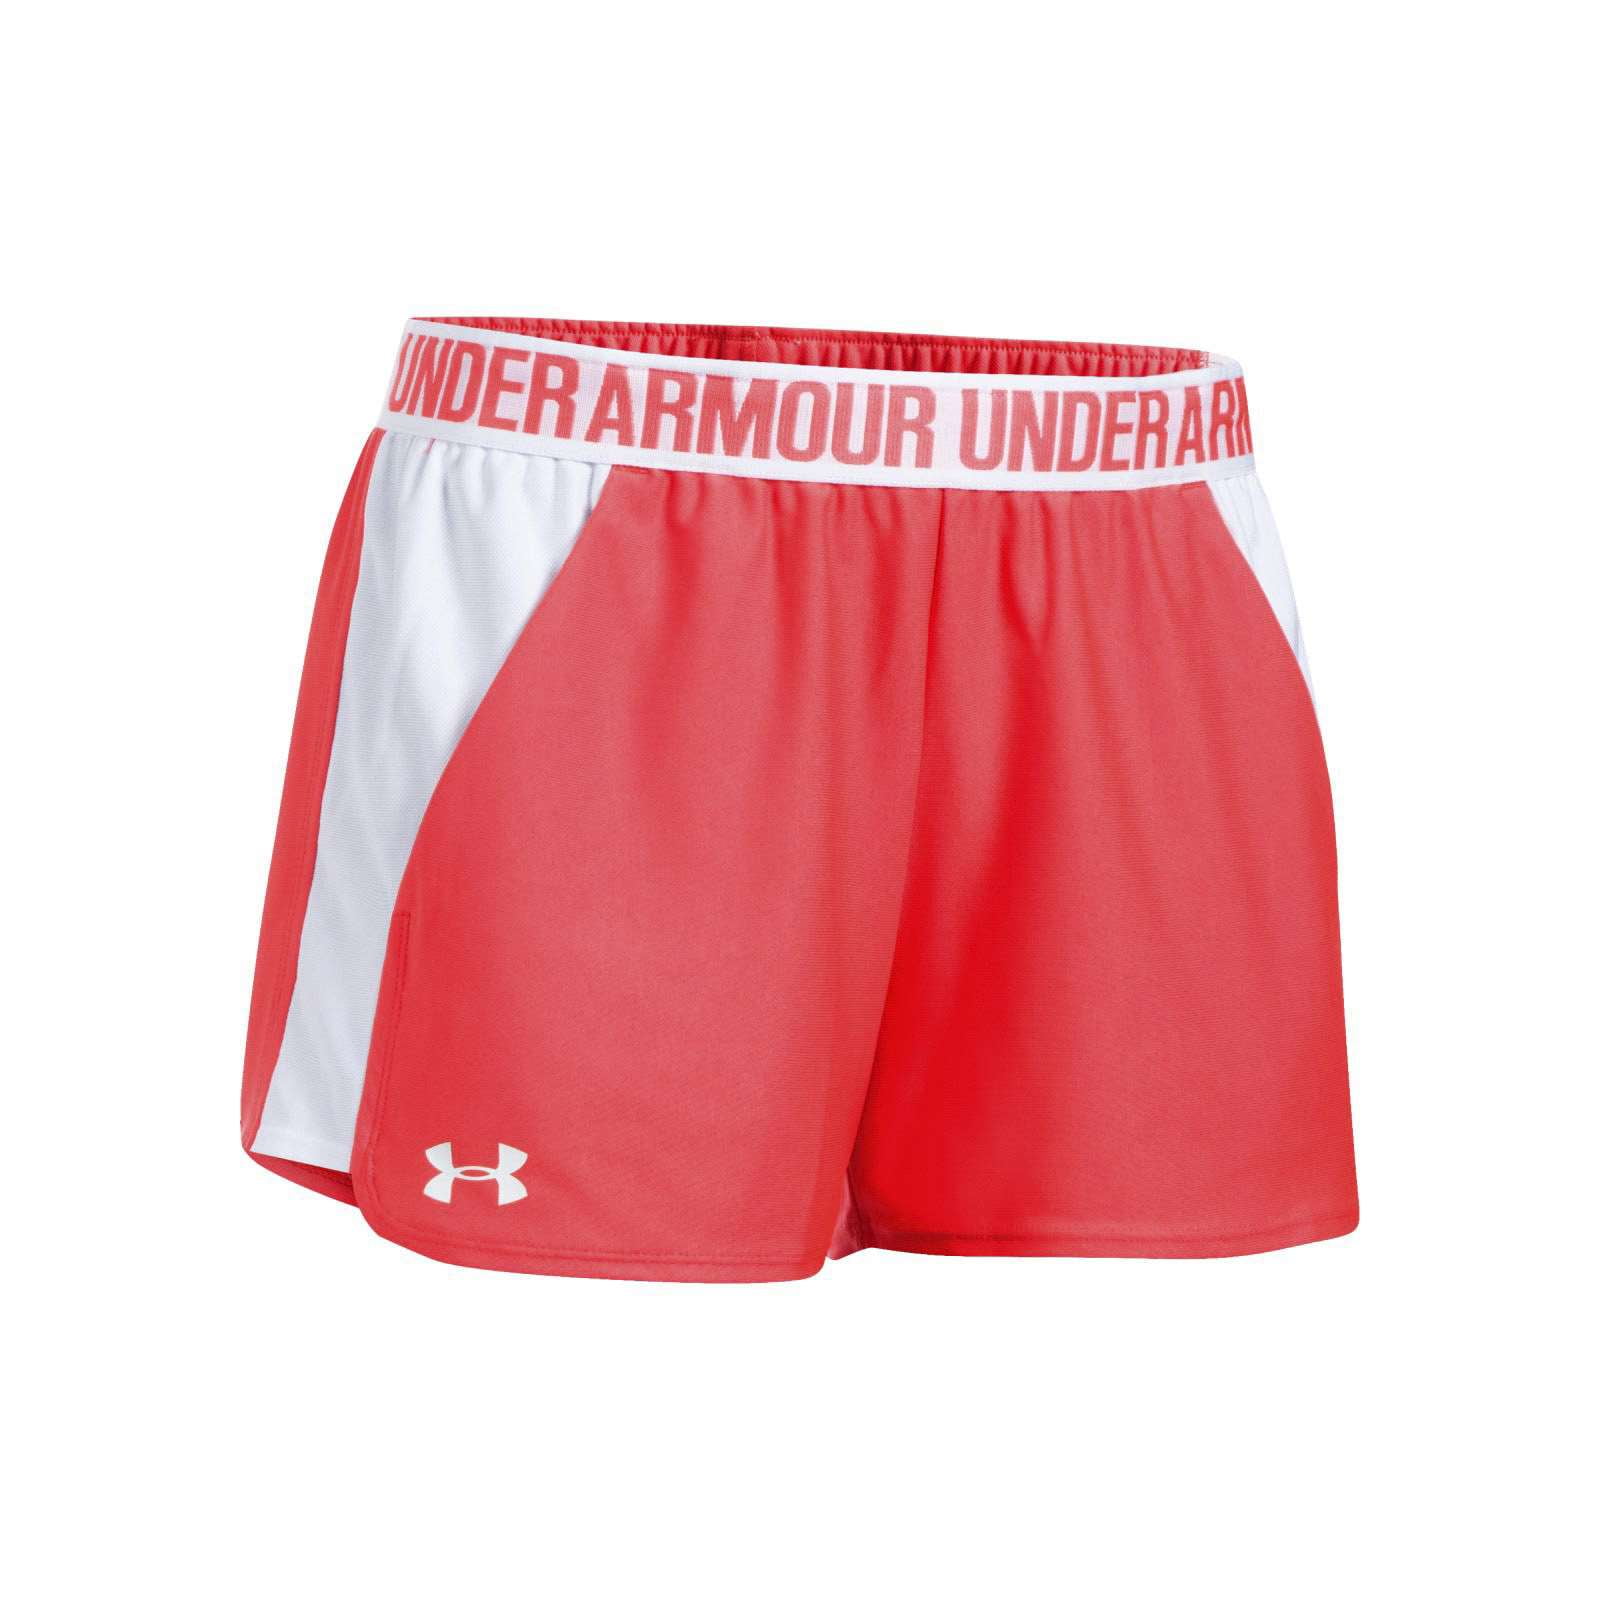 Under Armour Play Up 2.0 Shorts HeatGear Neon Red Size Large Best Price Free P&P 